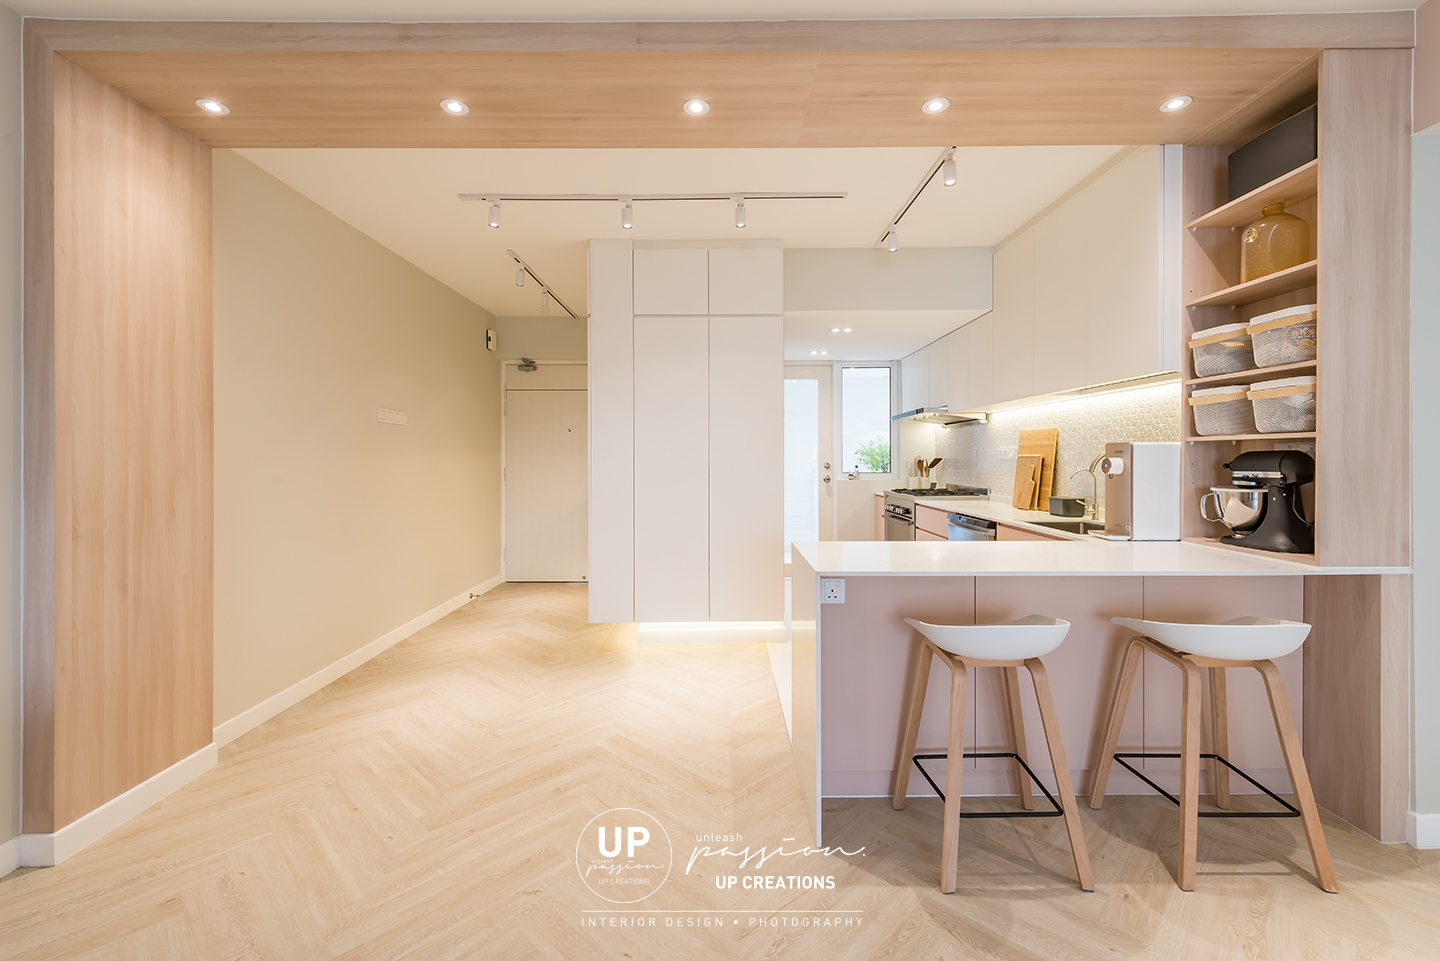 Mont Kiara Pines condo wood arch is the highlight to separate the space between dining and kitchen which also complete the space